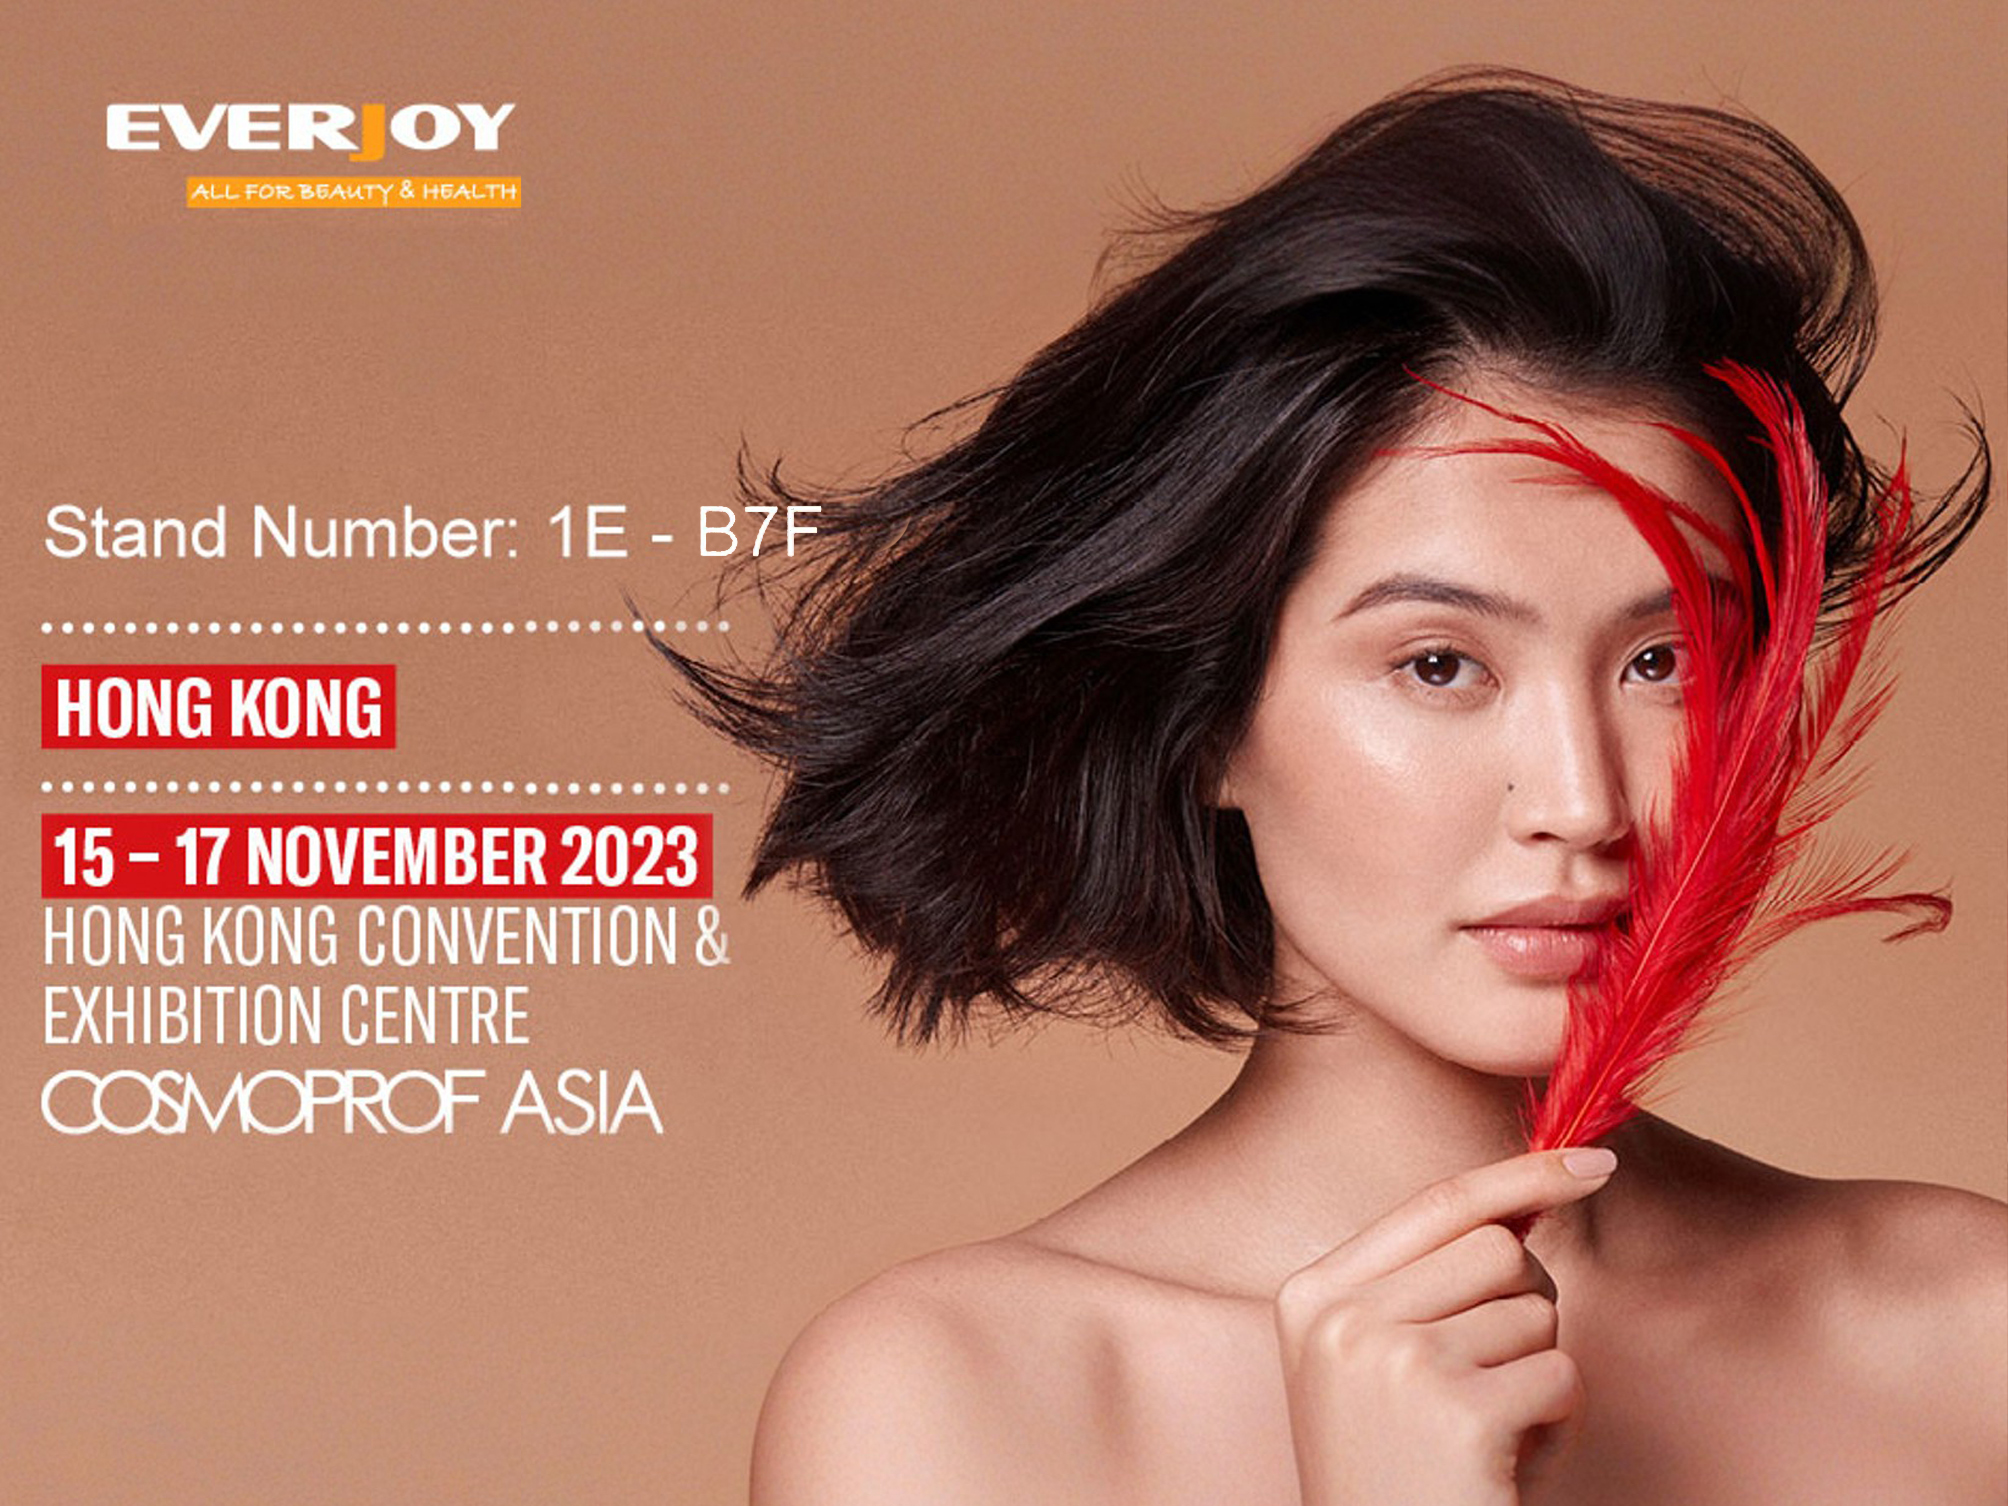 2023 Cosmoprof Asia fair from Nov. 15th to 17th- Hall 1E Booth B7F at Hongkong Convention & Exhibition Center.